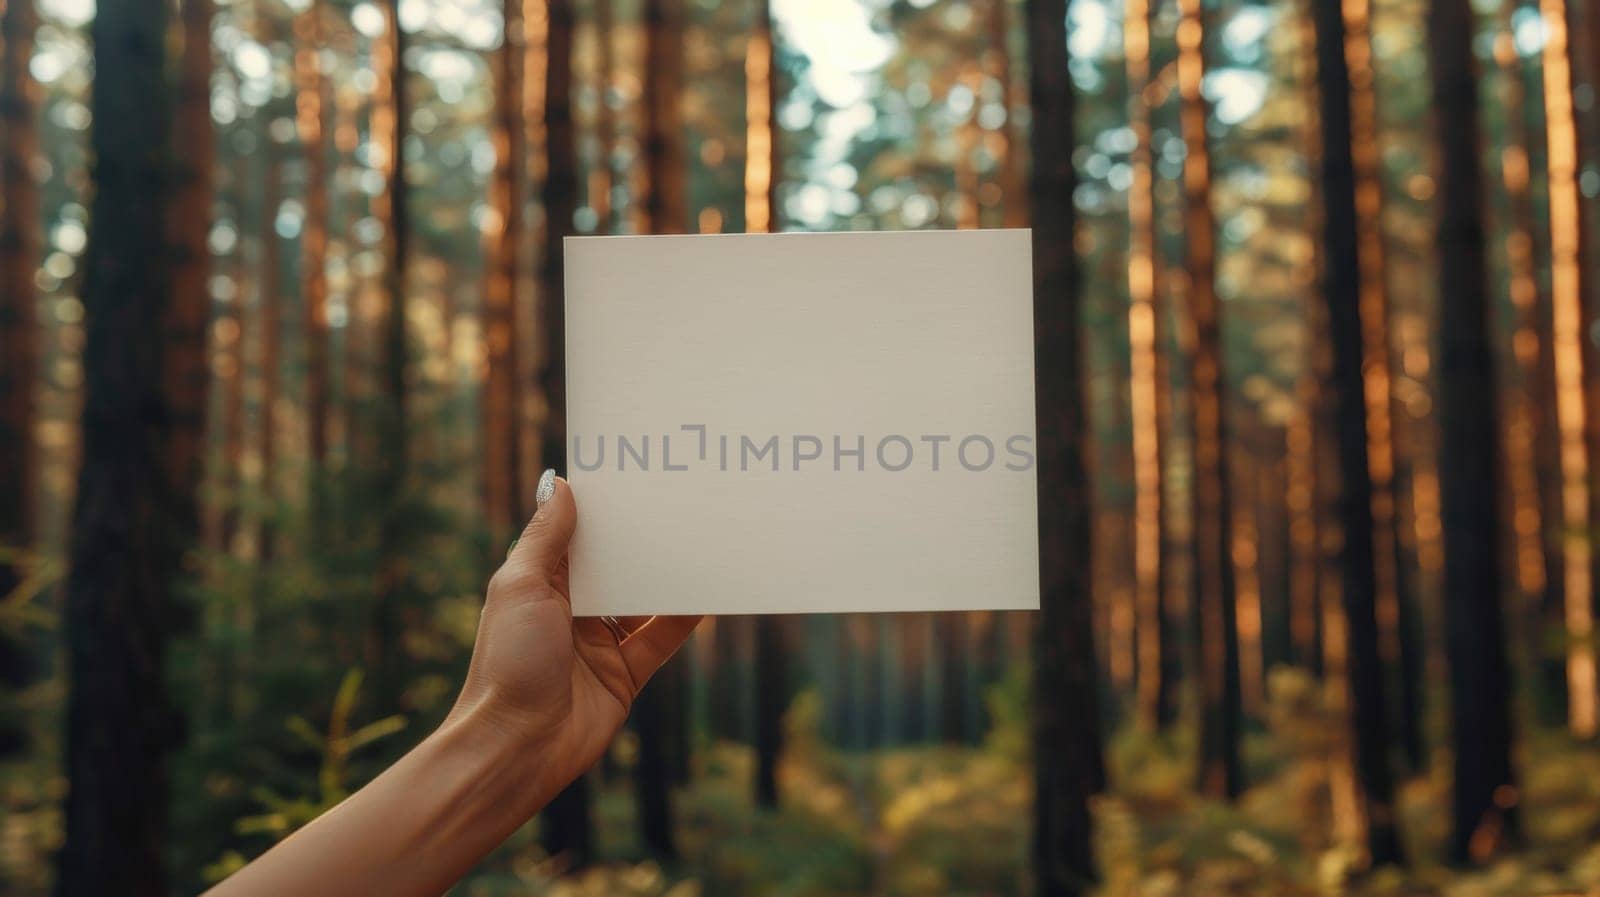 A person holding a blank piece of paper in front of trees